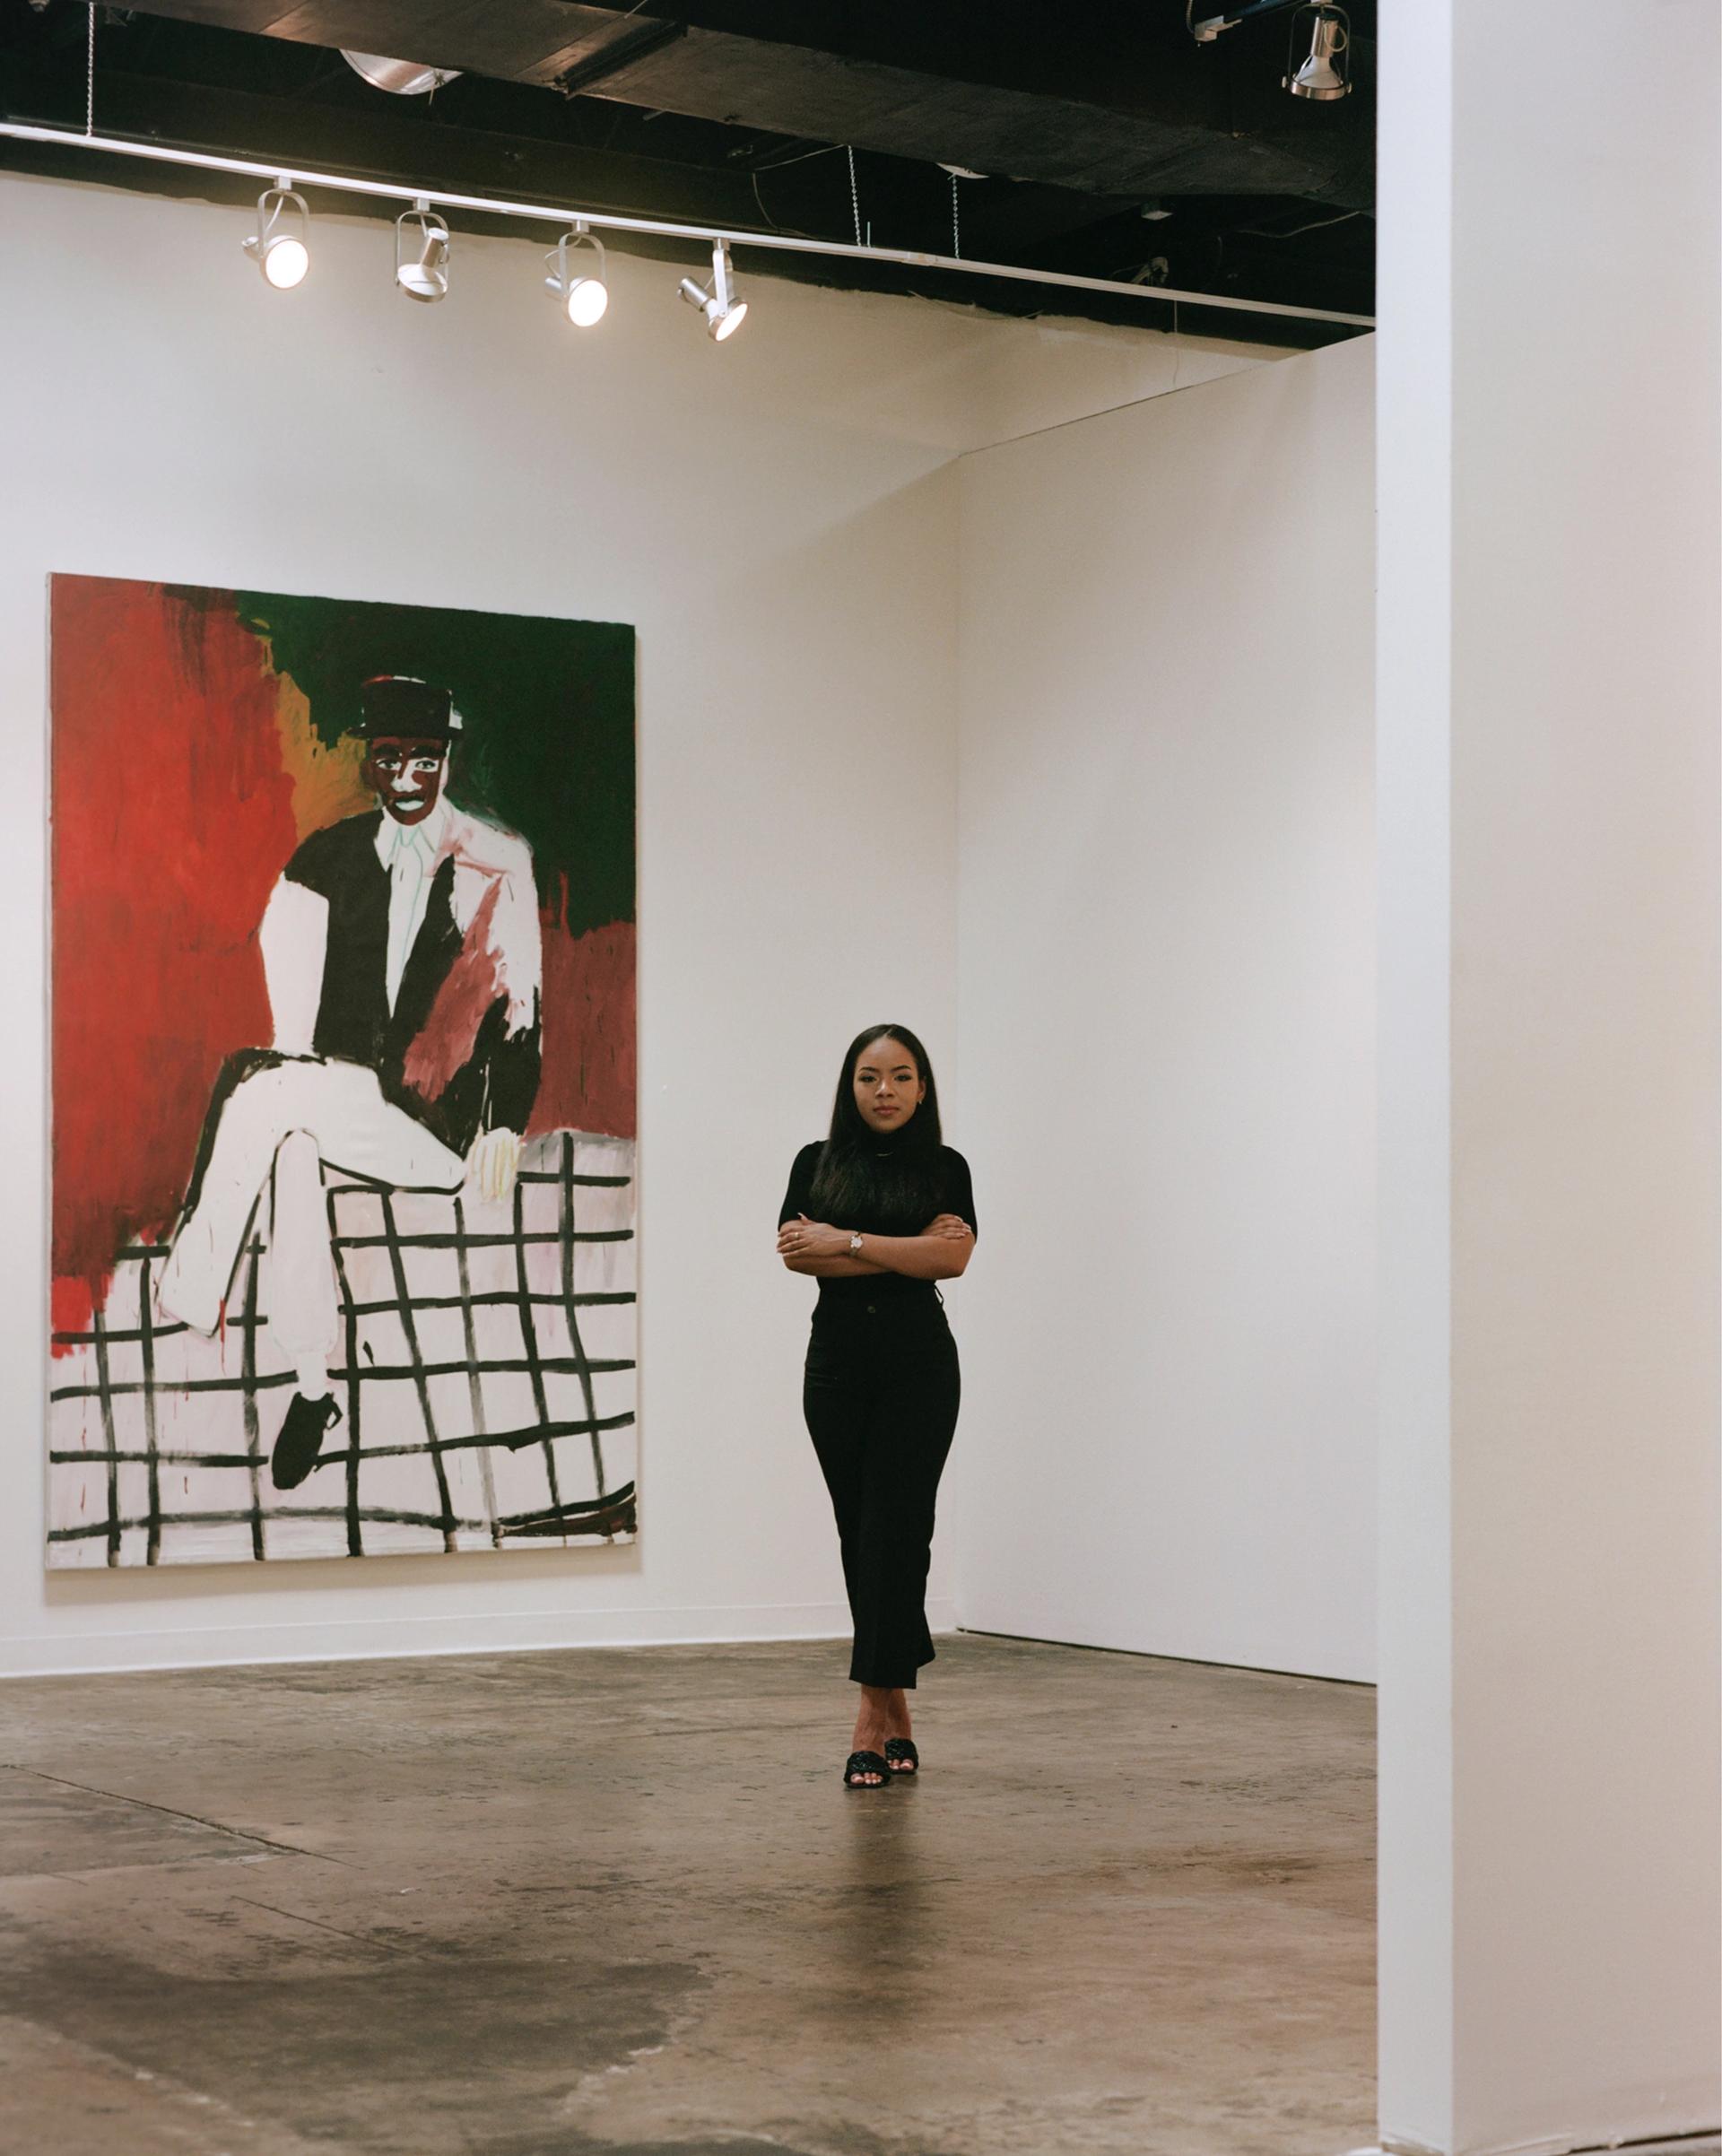 Founder and director of Atlanta Art Week Kendra Walker in front of Still Untitled by Patrick Eugene. Photo by Piera Moore. Courtesy of Atlanta Art Week